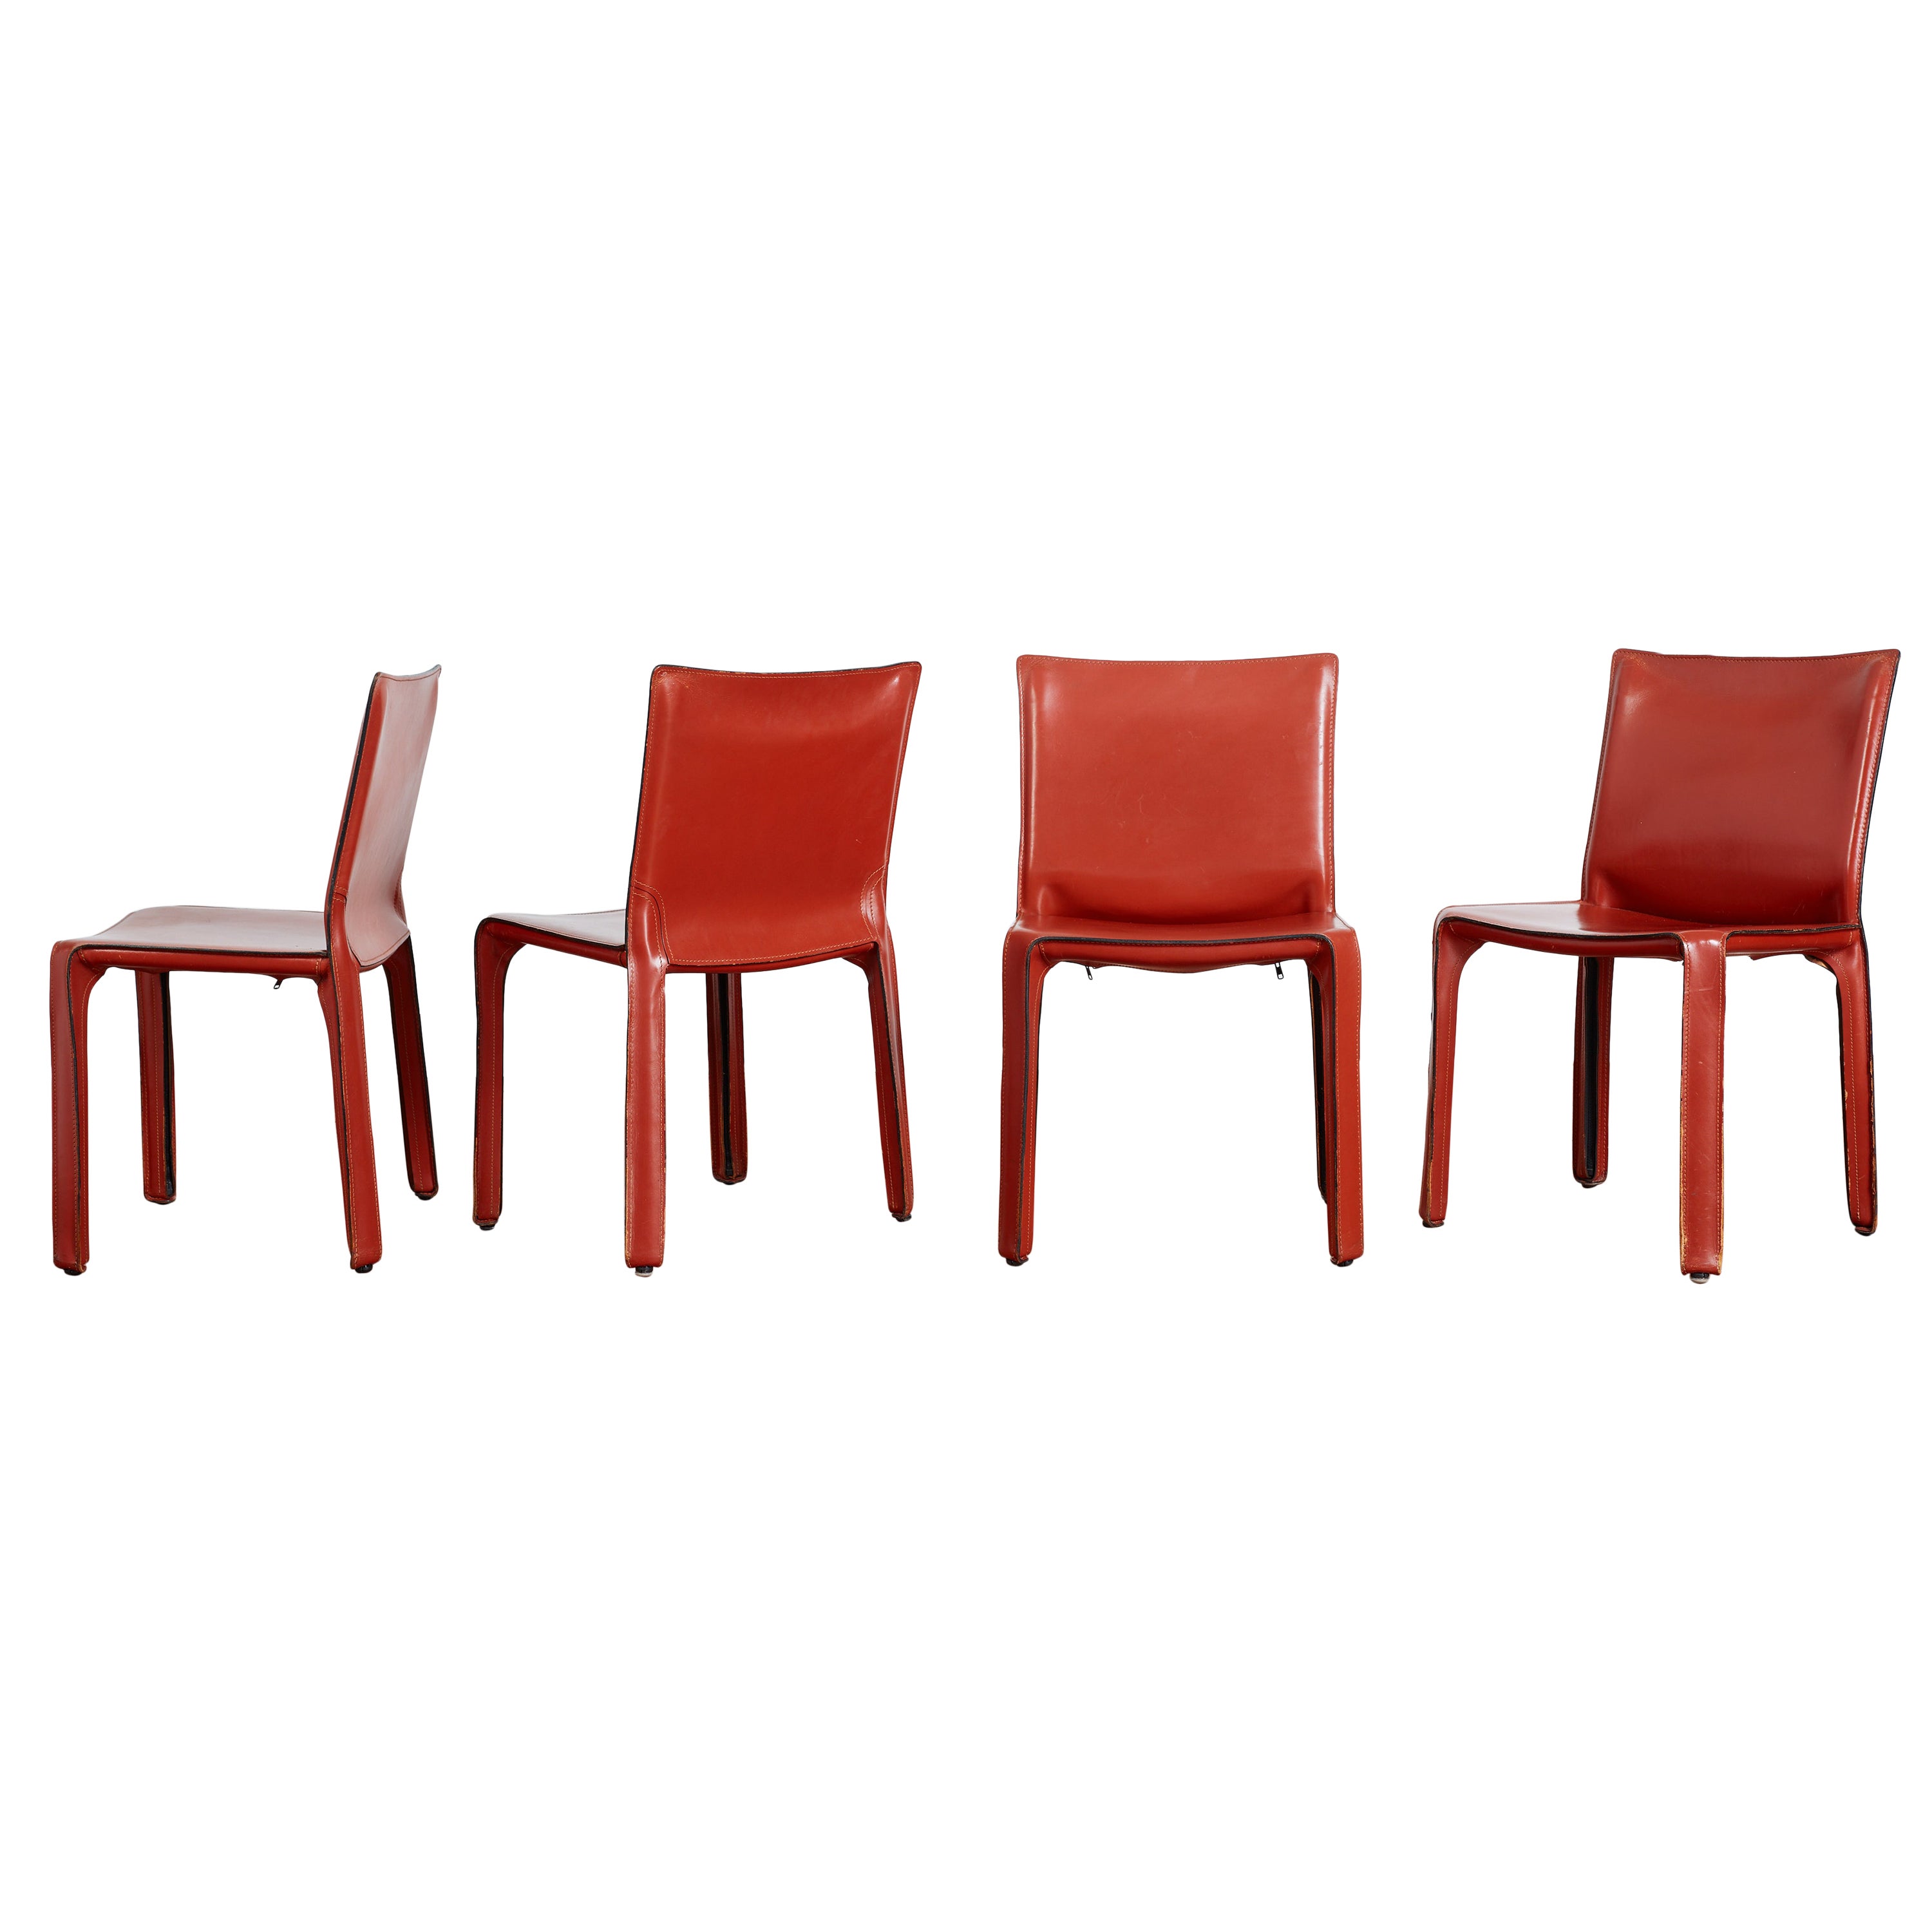 Mario Bellini "Cab" Chairs  For Sale